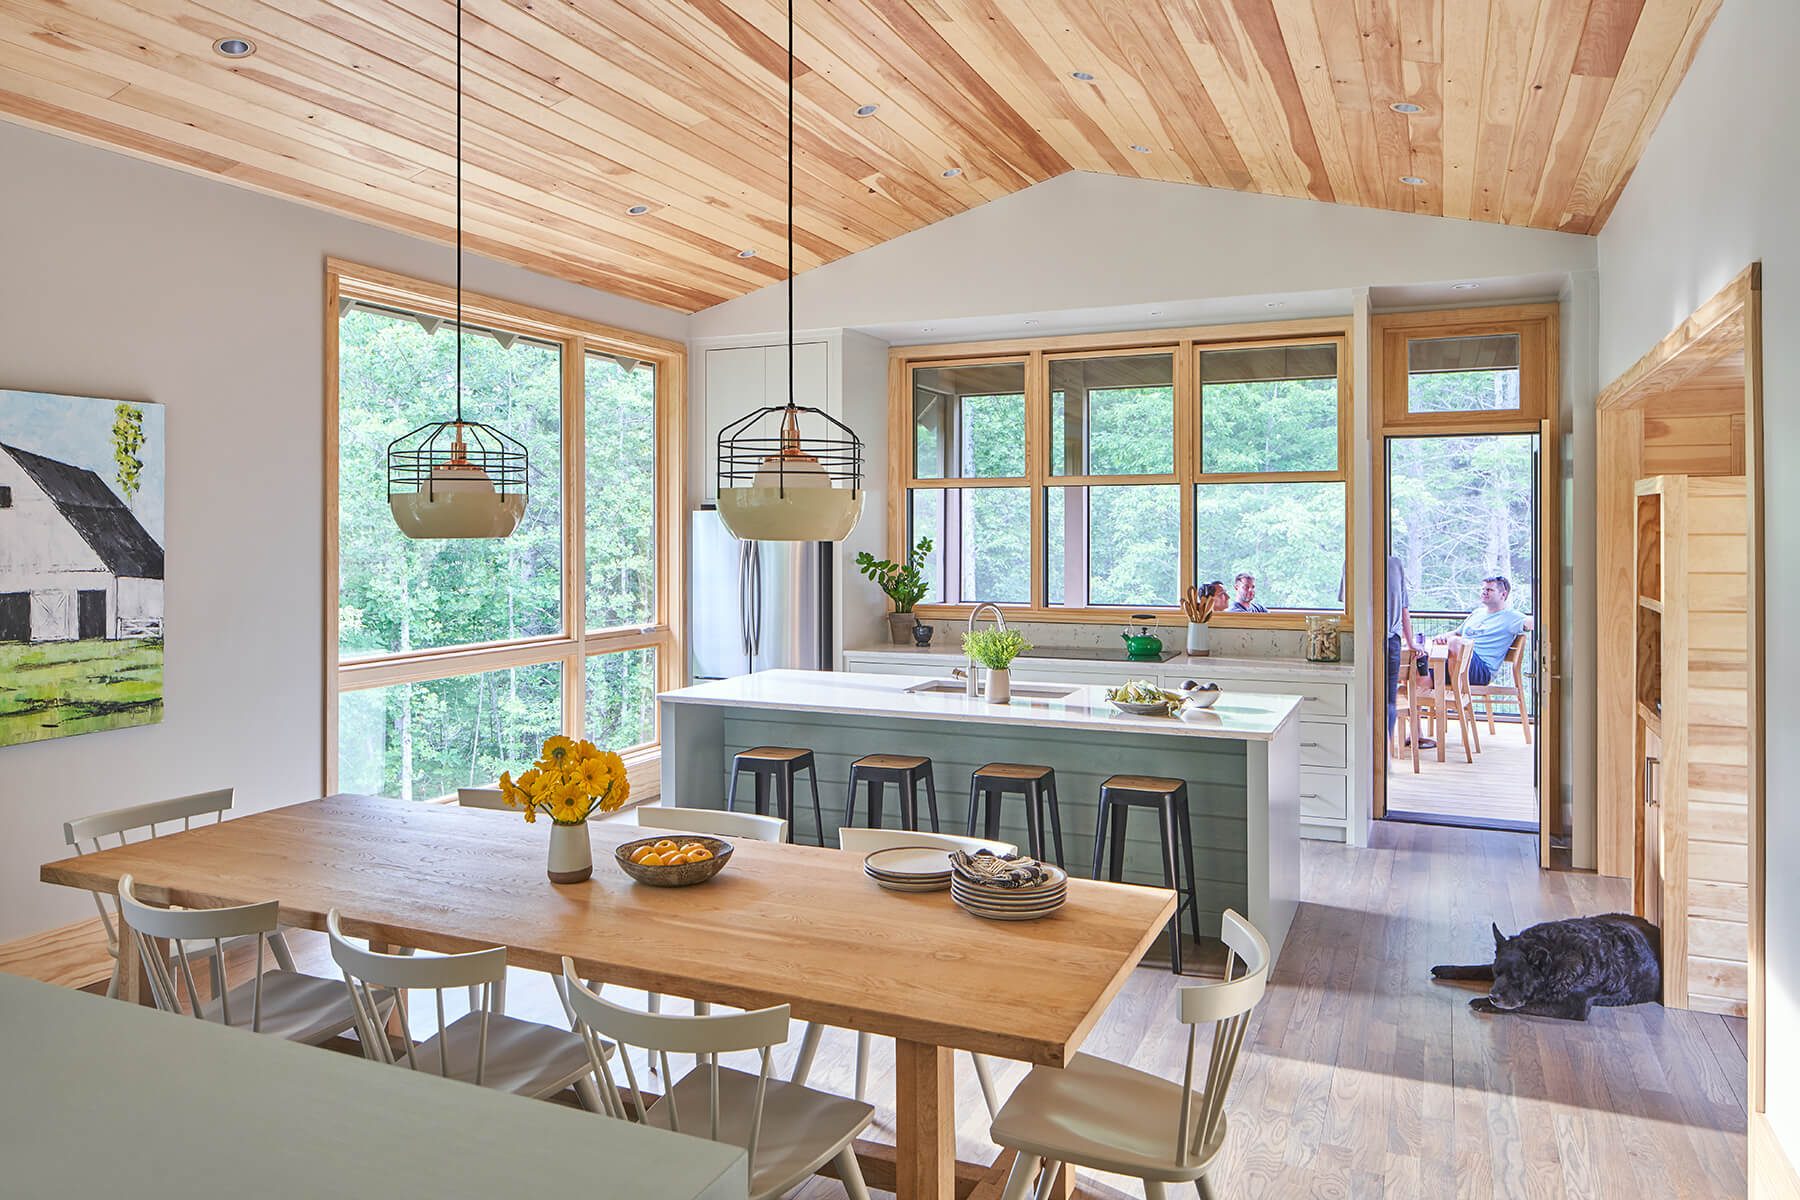 The Camp Campos living room and kitchen architectural home design in Western North Carolina